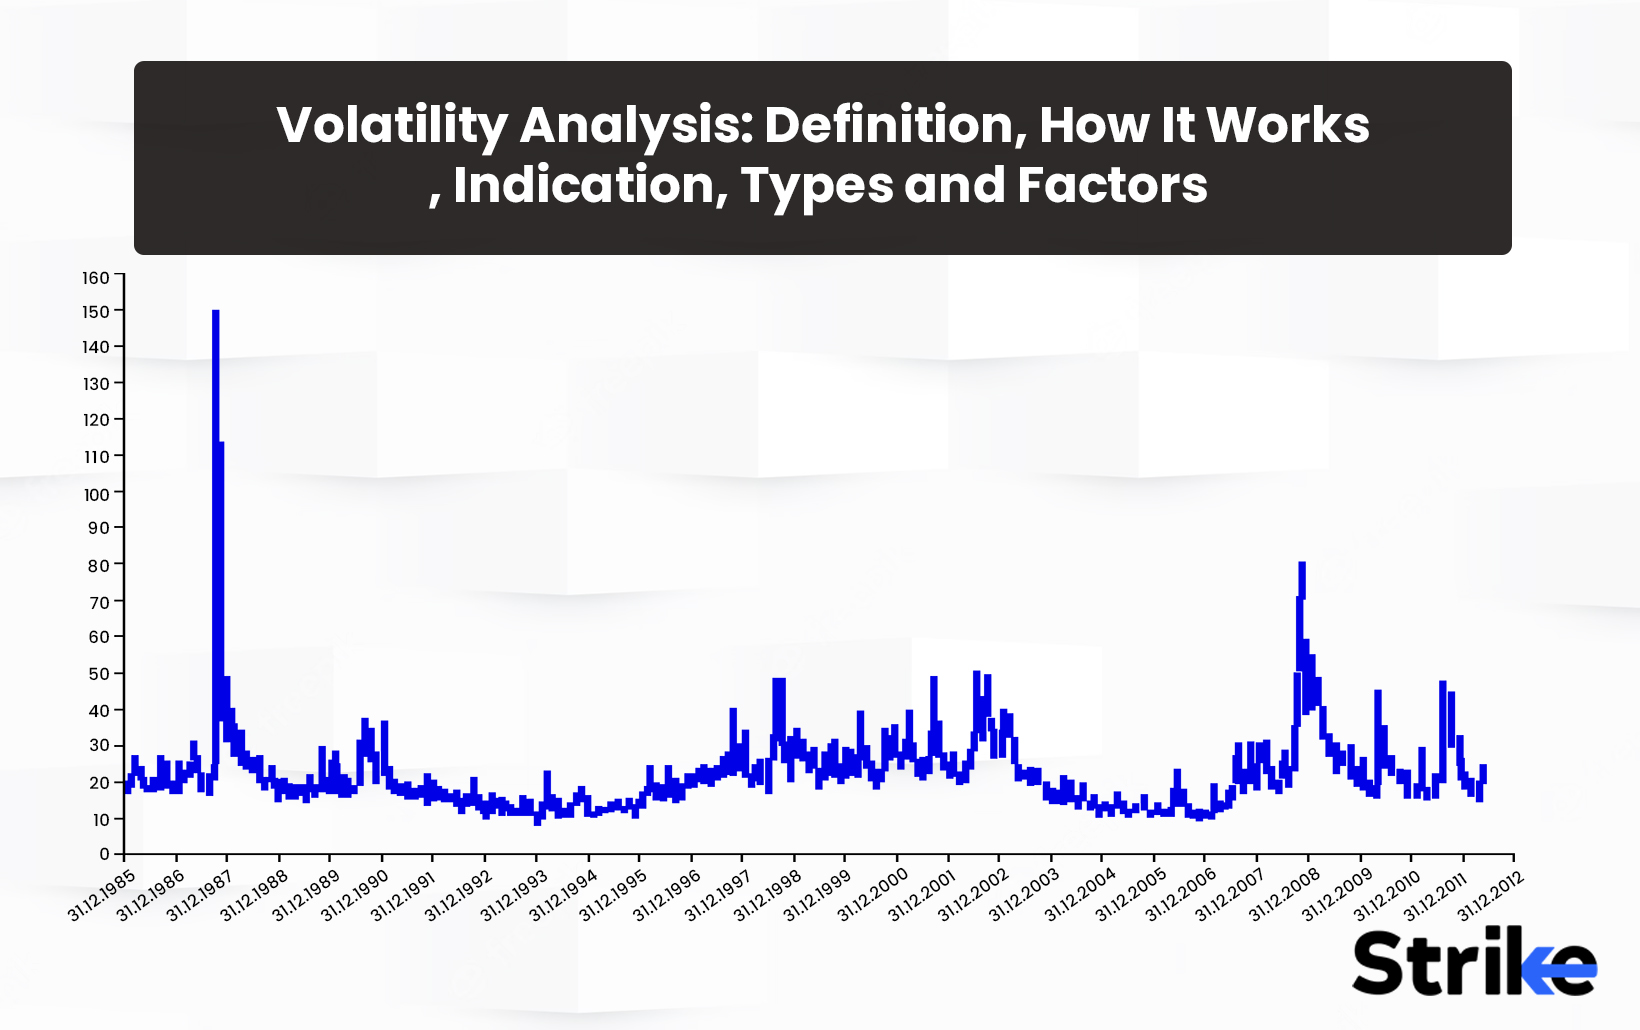 Volatility Analysis: Definition, How It Works, Indication, Types and Factors